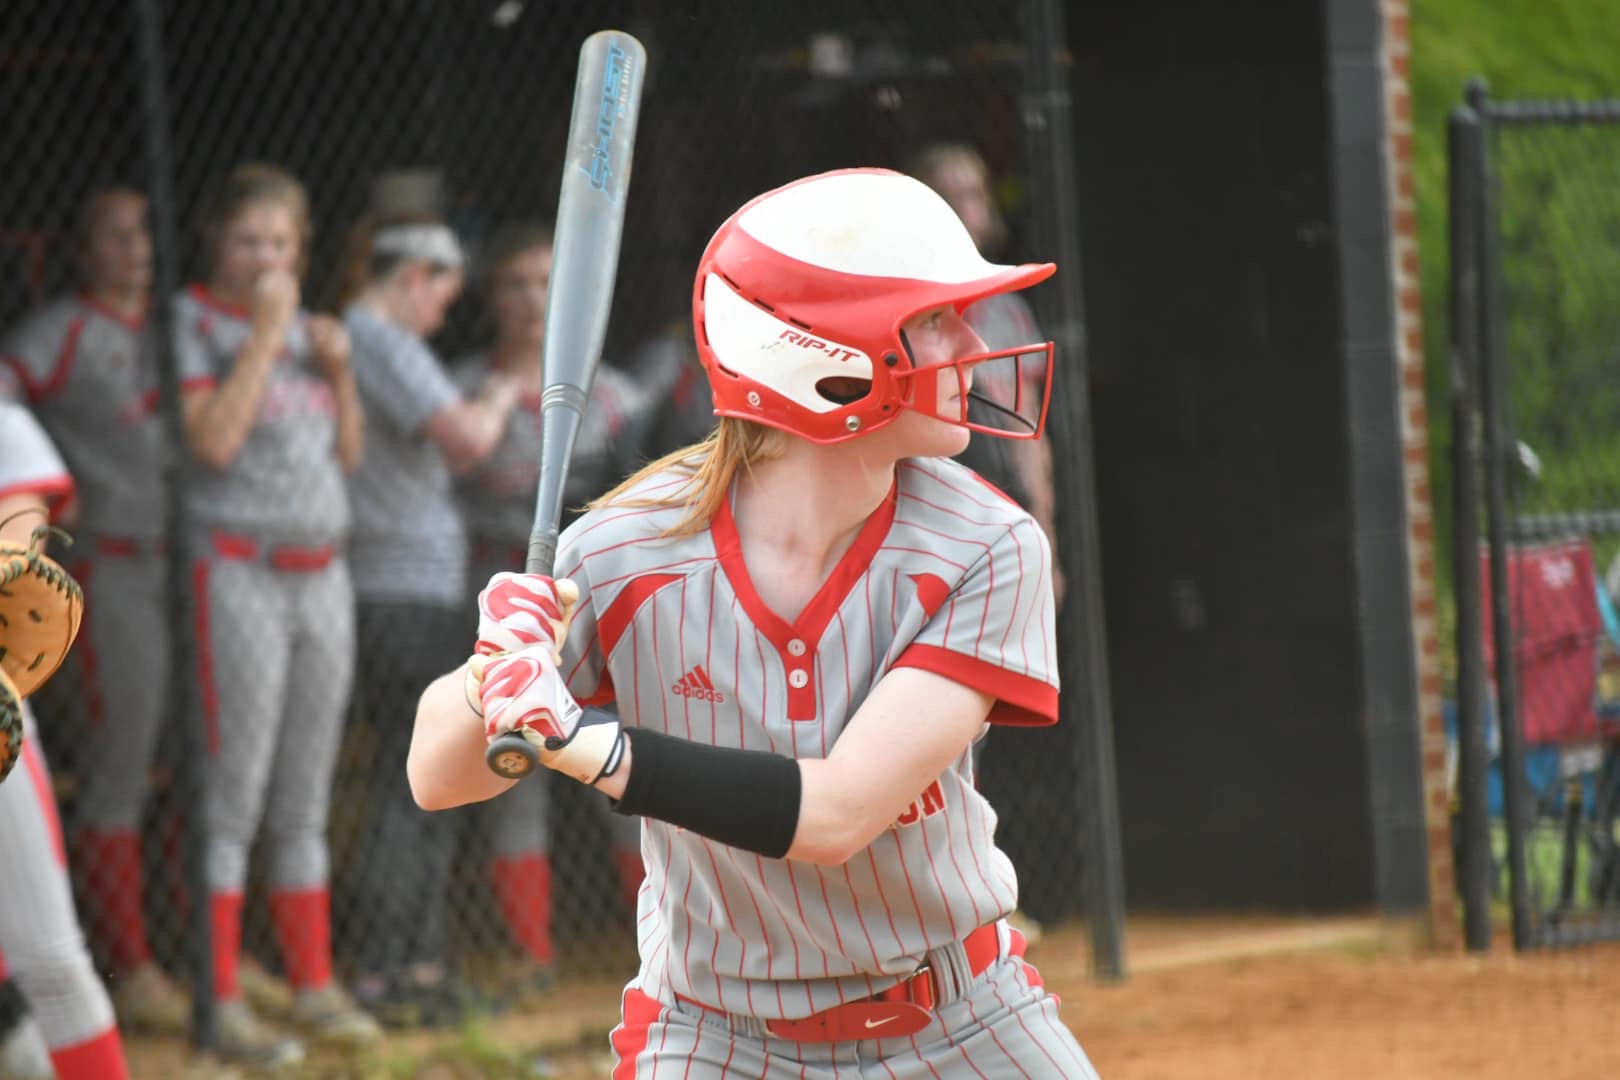 West Union’s Annie Orman Commits to Play for Ole Miss Softball